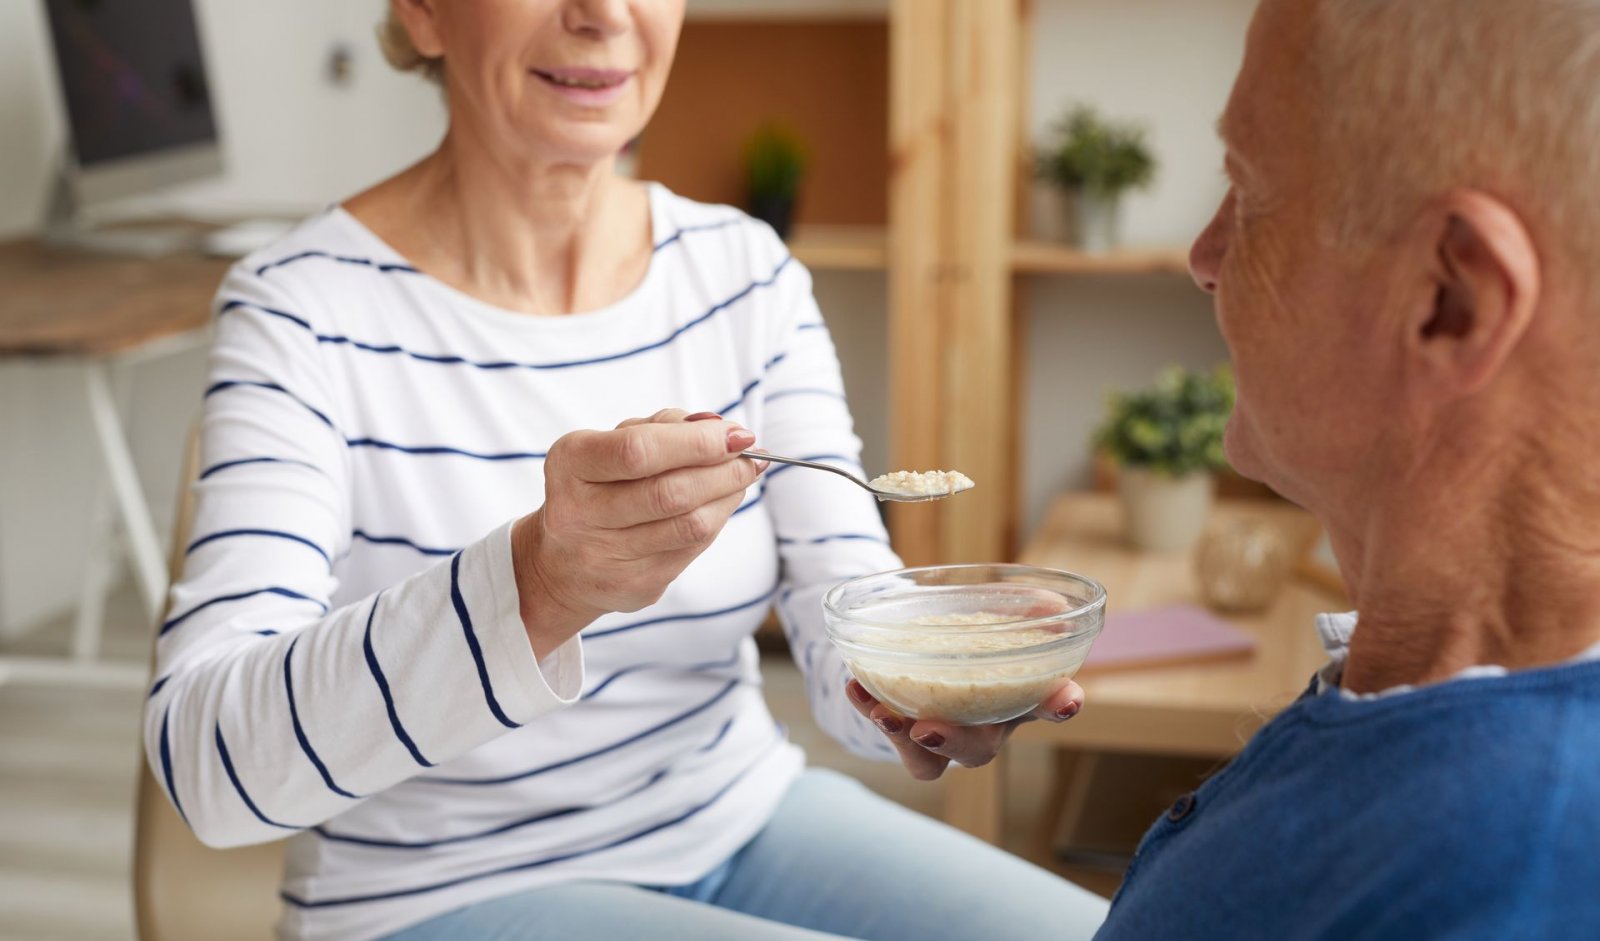 A senior woman feeds oatmeal to her spouse